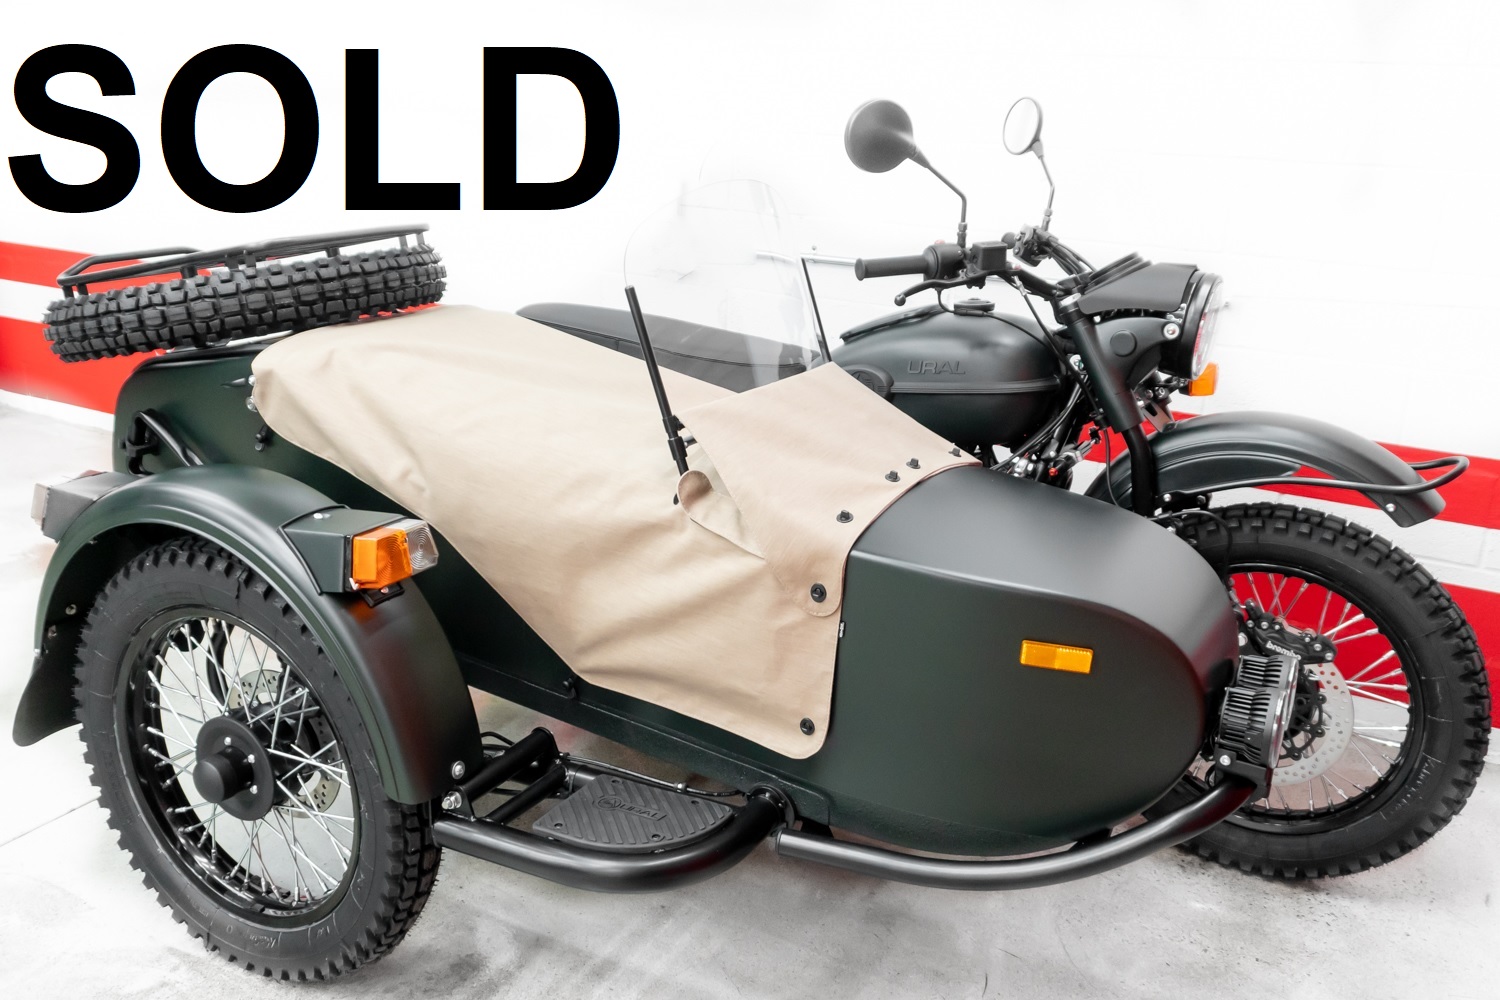 2022 Ural Gear Up (2WD) - NEW 2022 MODEL